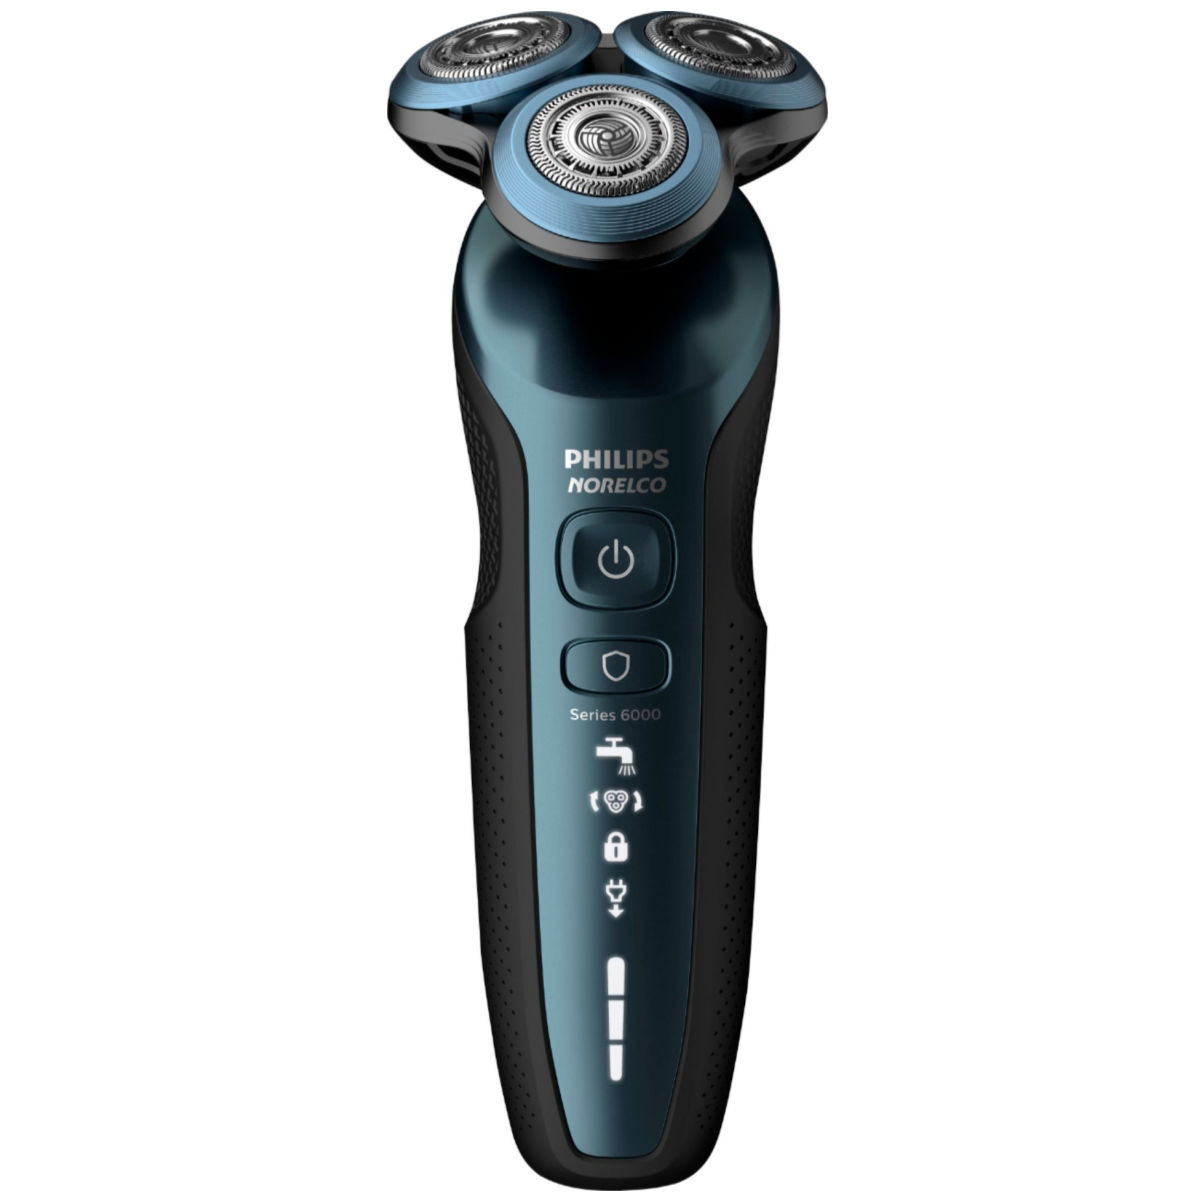 Philips Norelco 6850 Electric Shaver